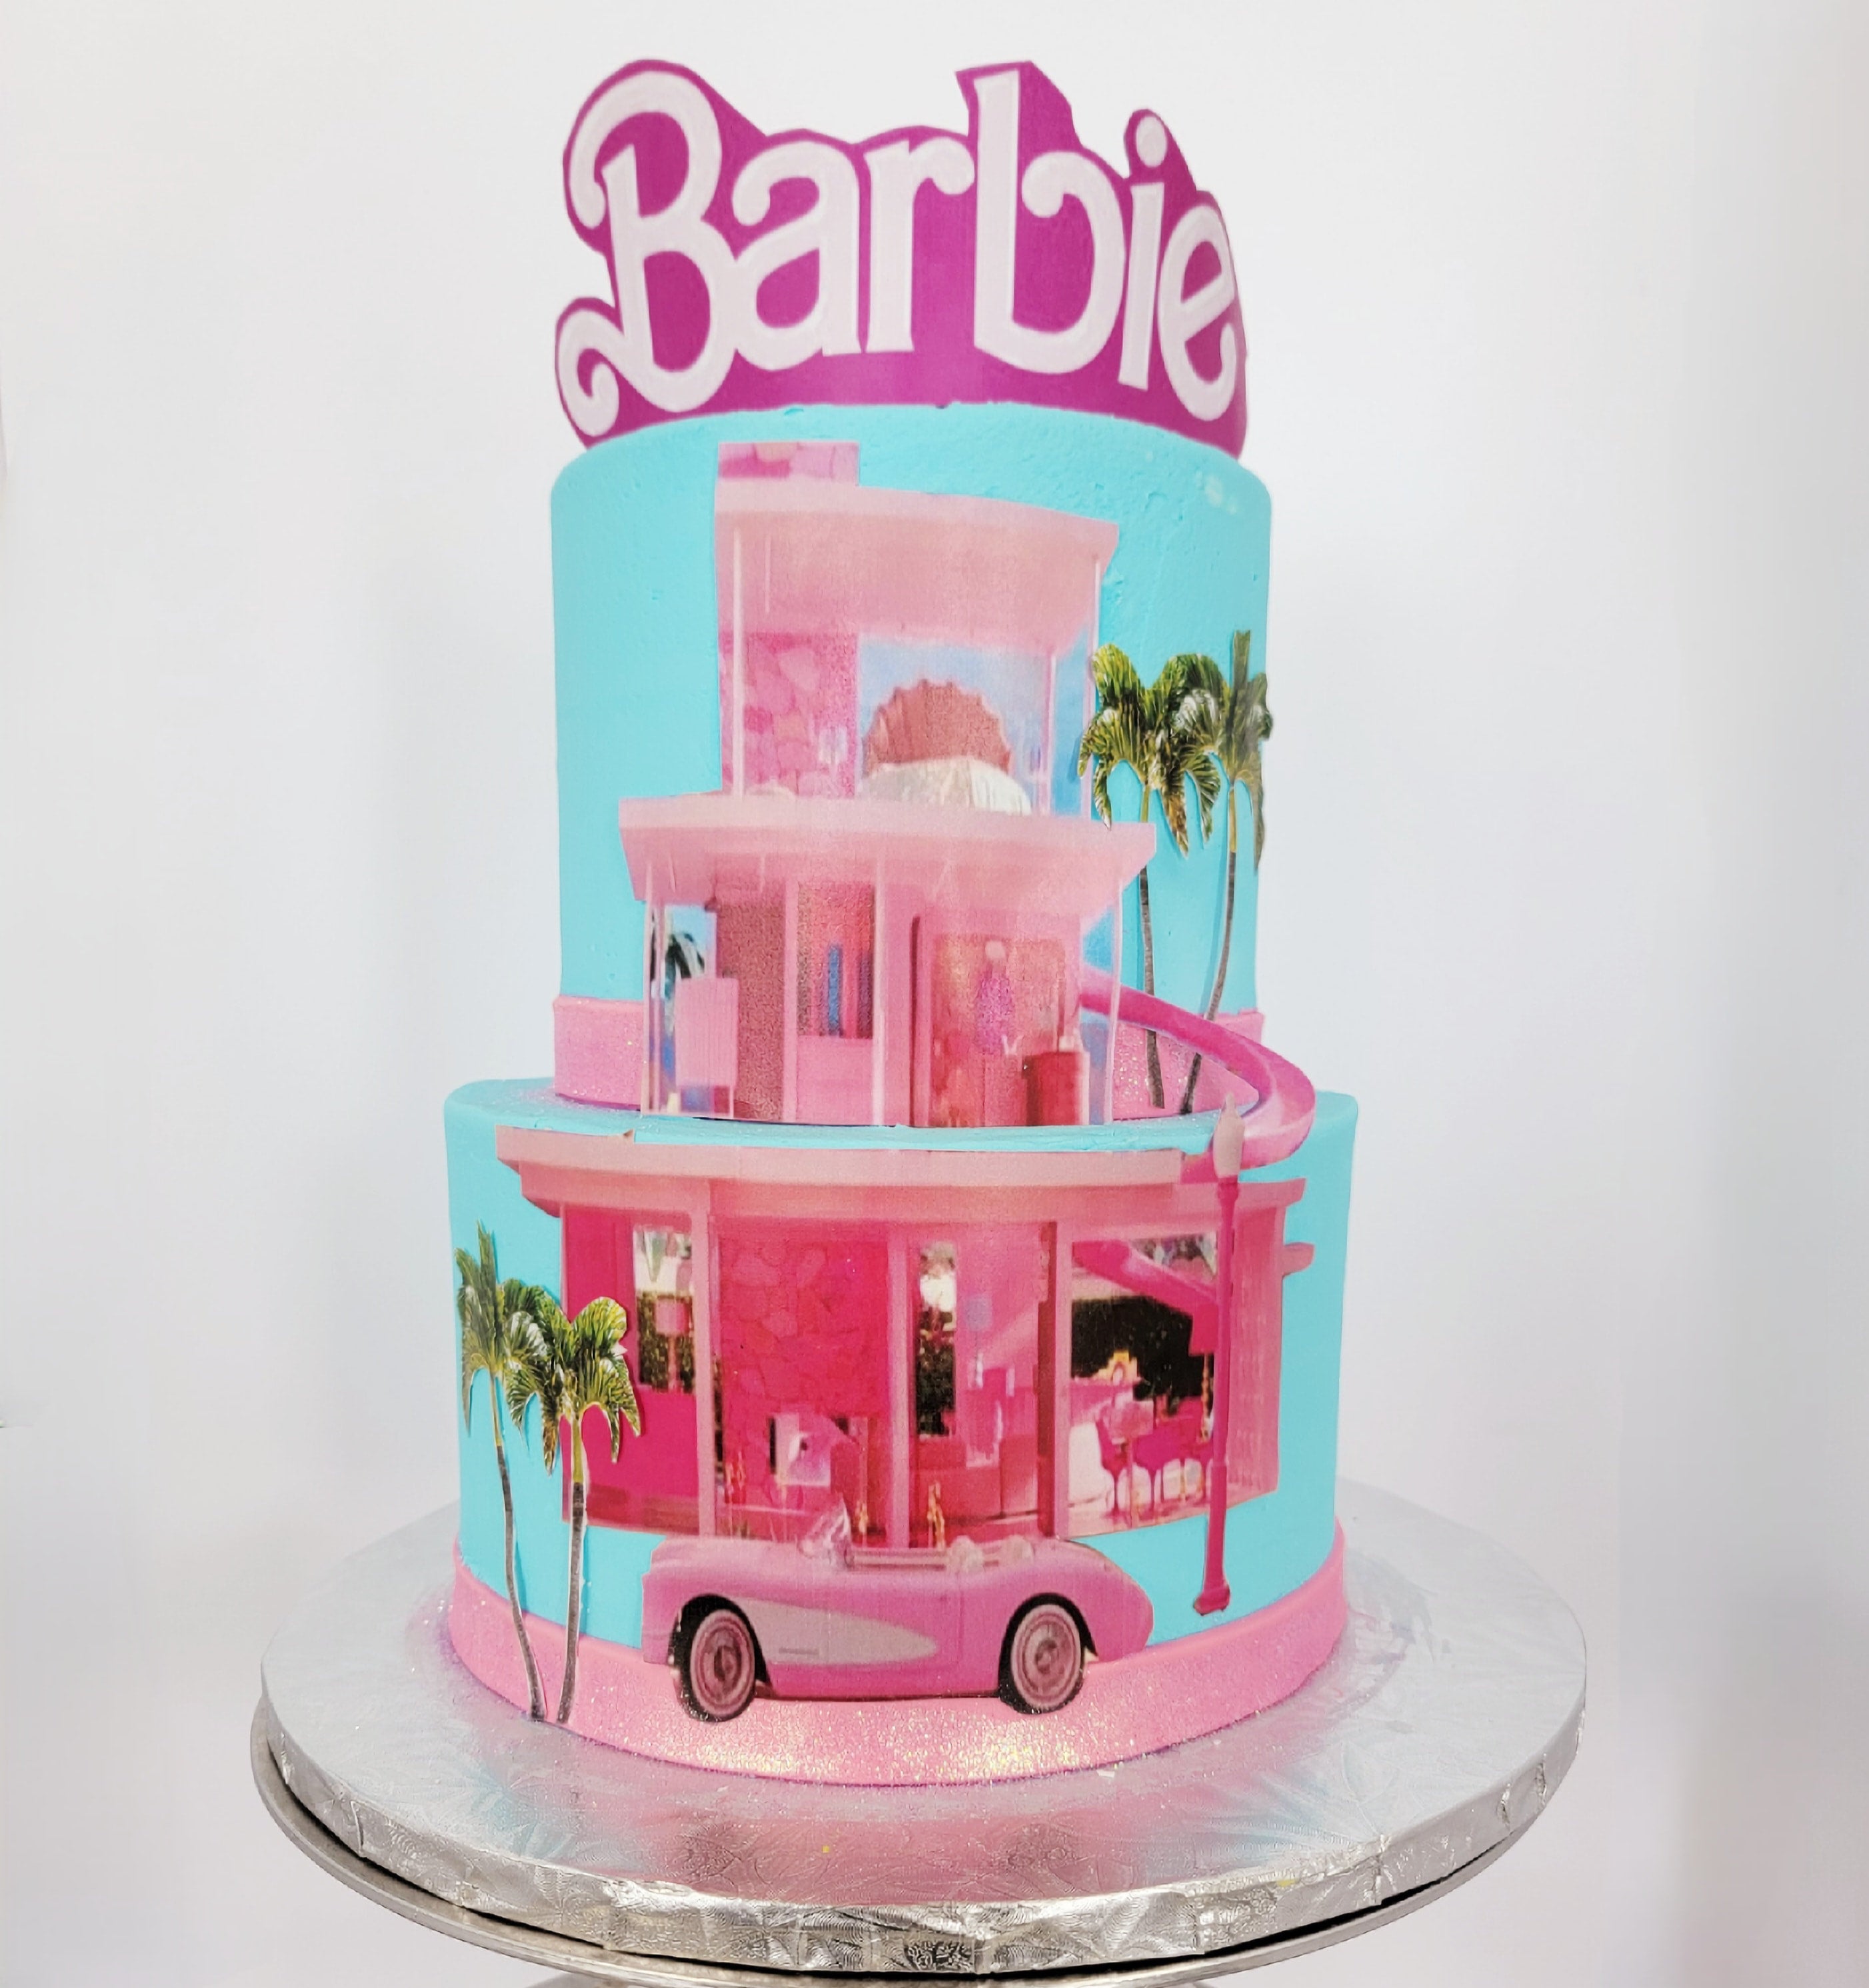 Top more than 124 barbie doll house cake - awesomeenglish.edu.vn